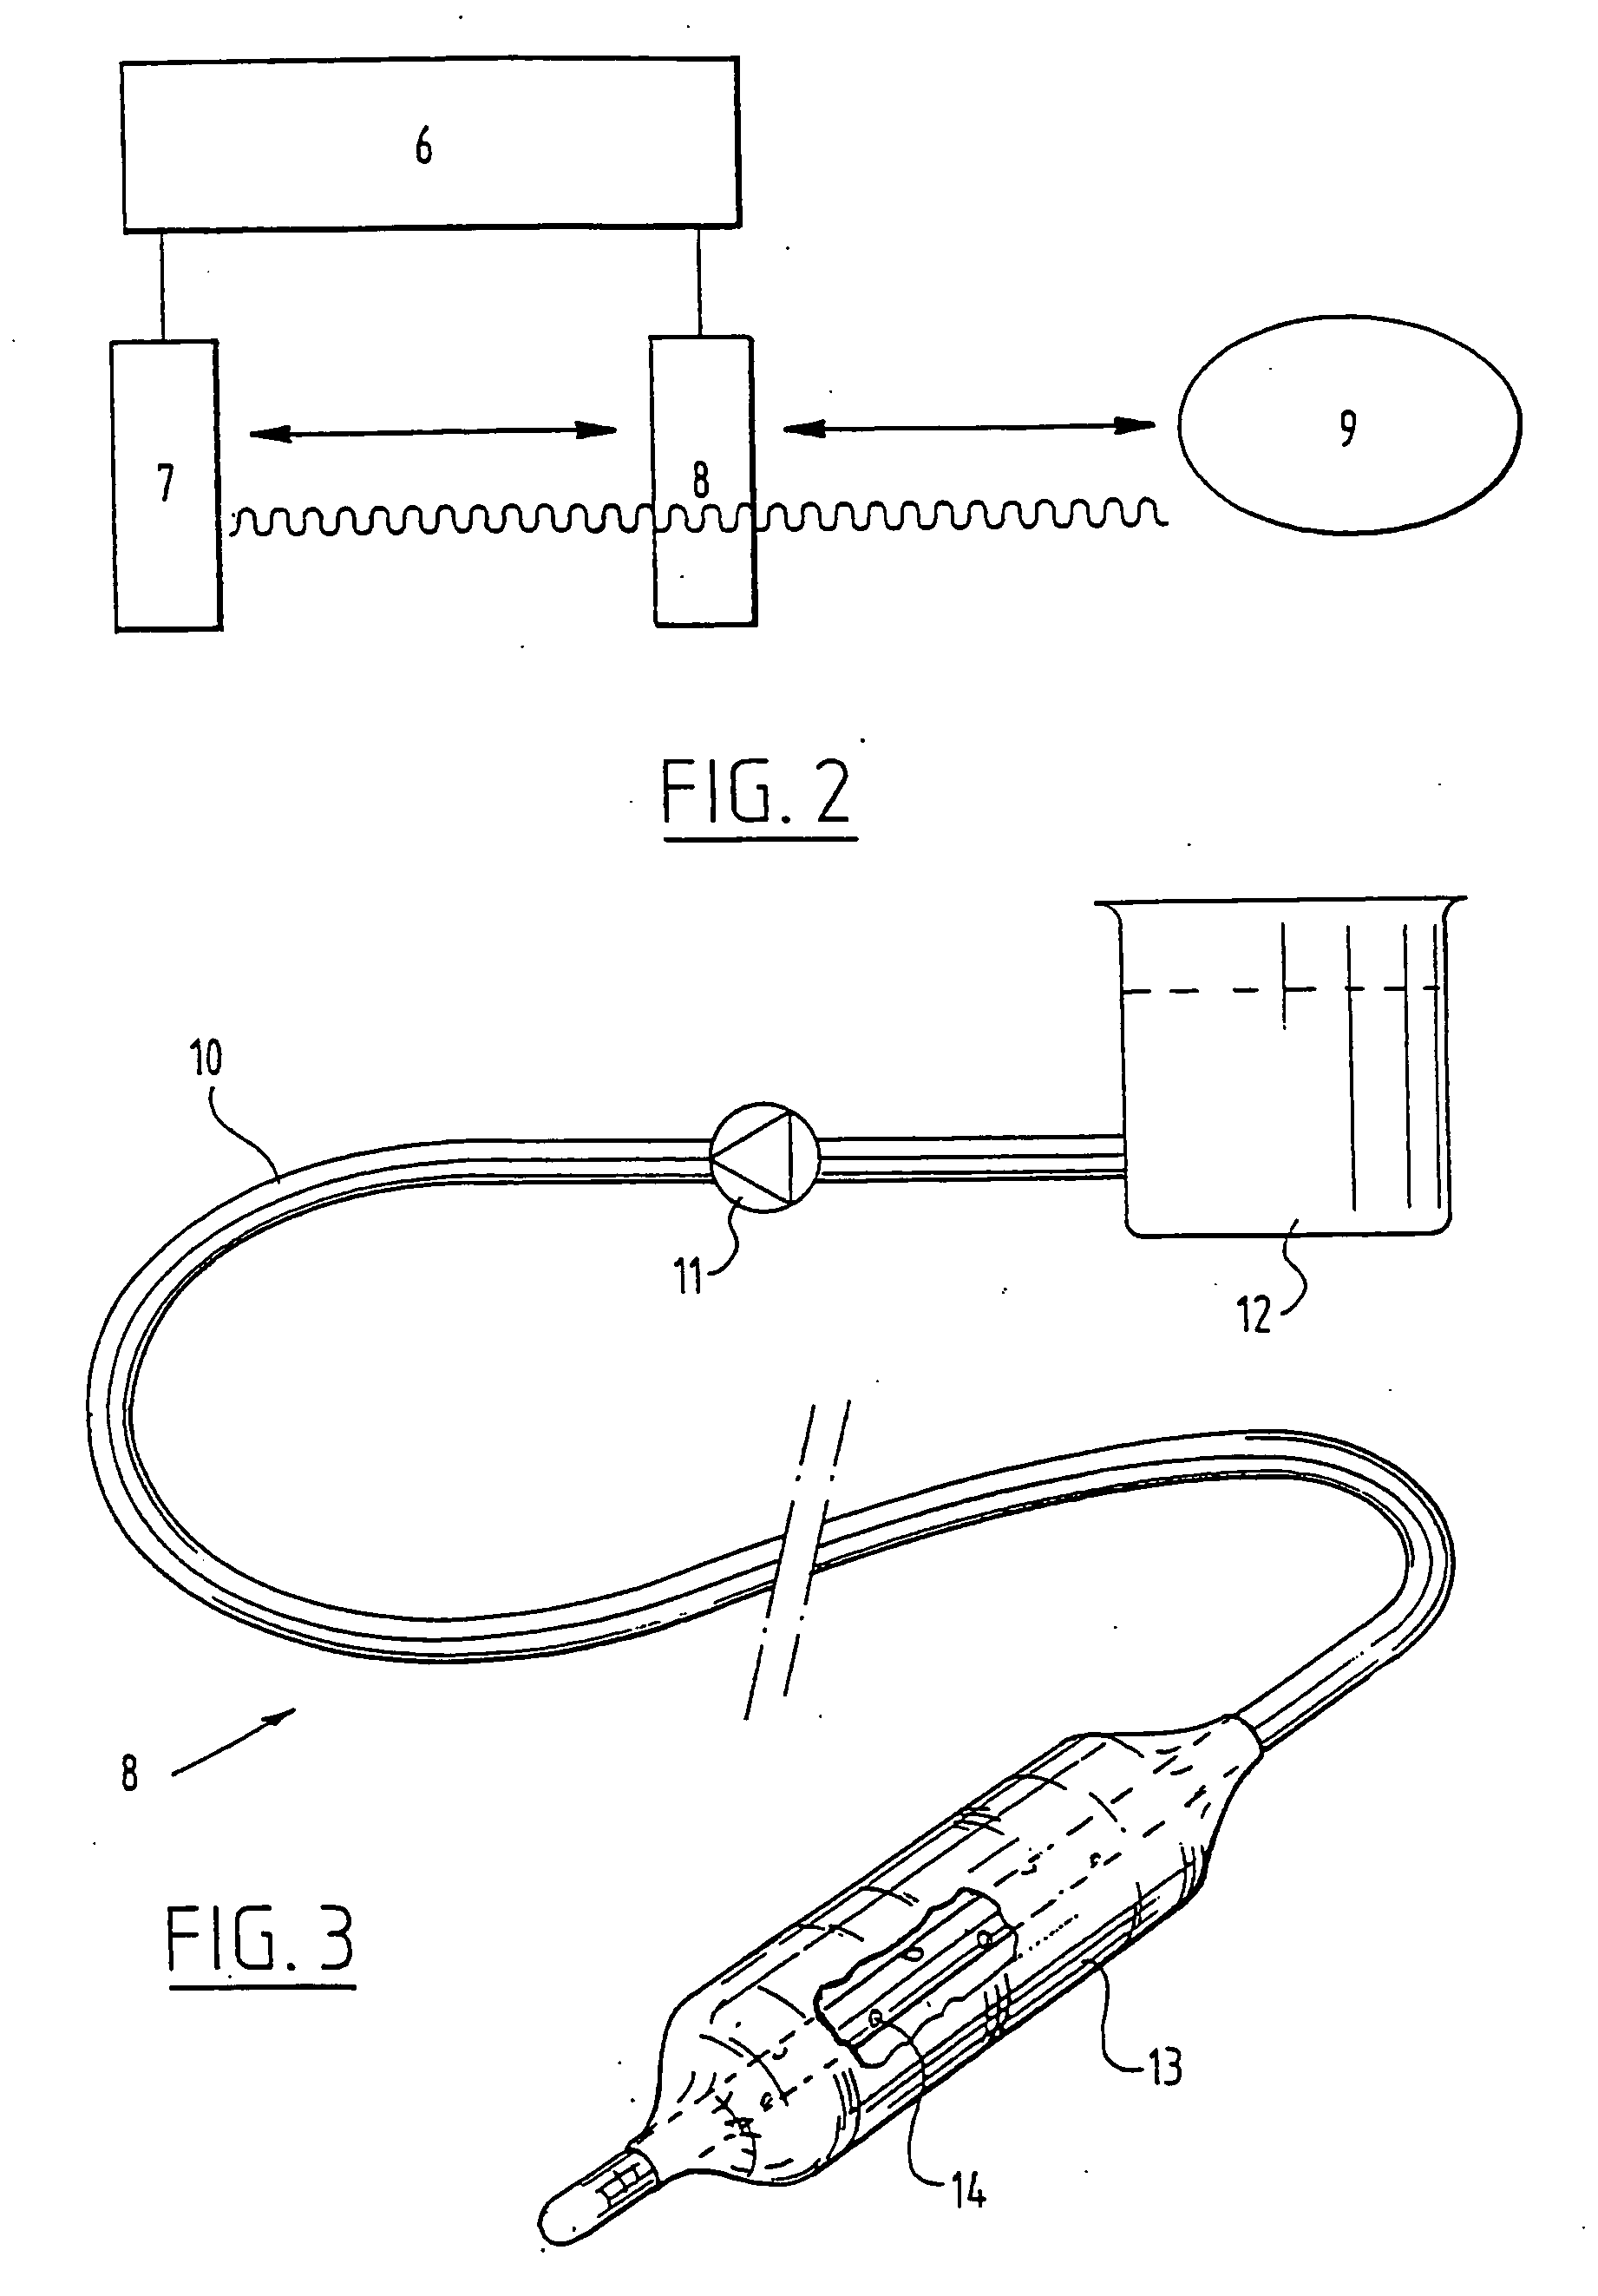 Transmission device for ultrasonic imaging system